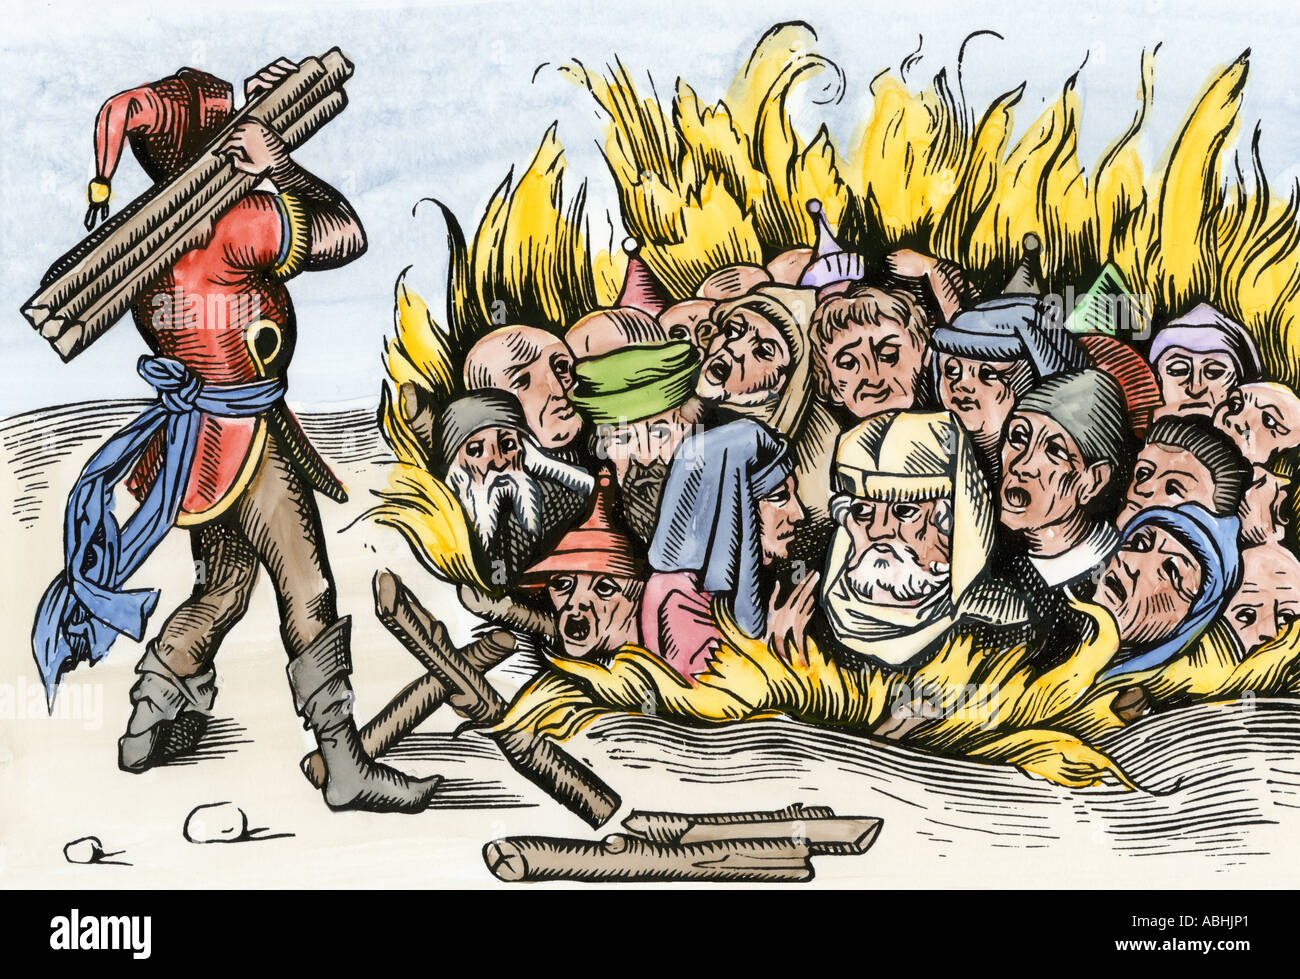 Jews of Cologne Germany burned alive in the late Middle Ages. Hand-colored woodcut Stock Photo